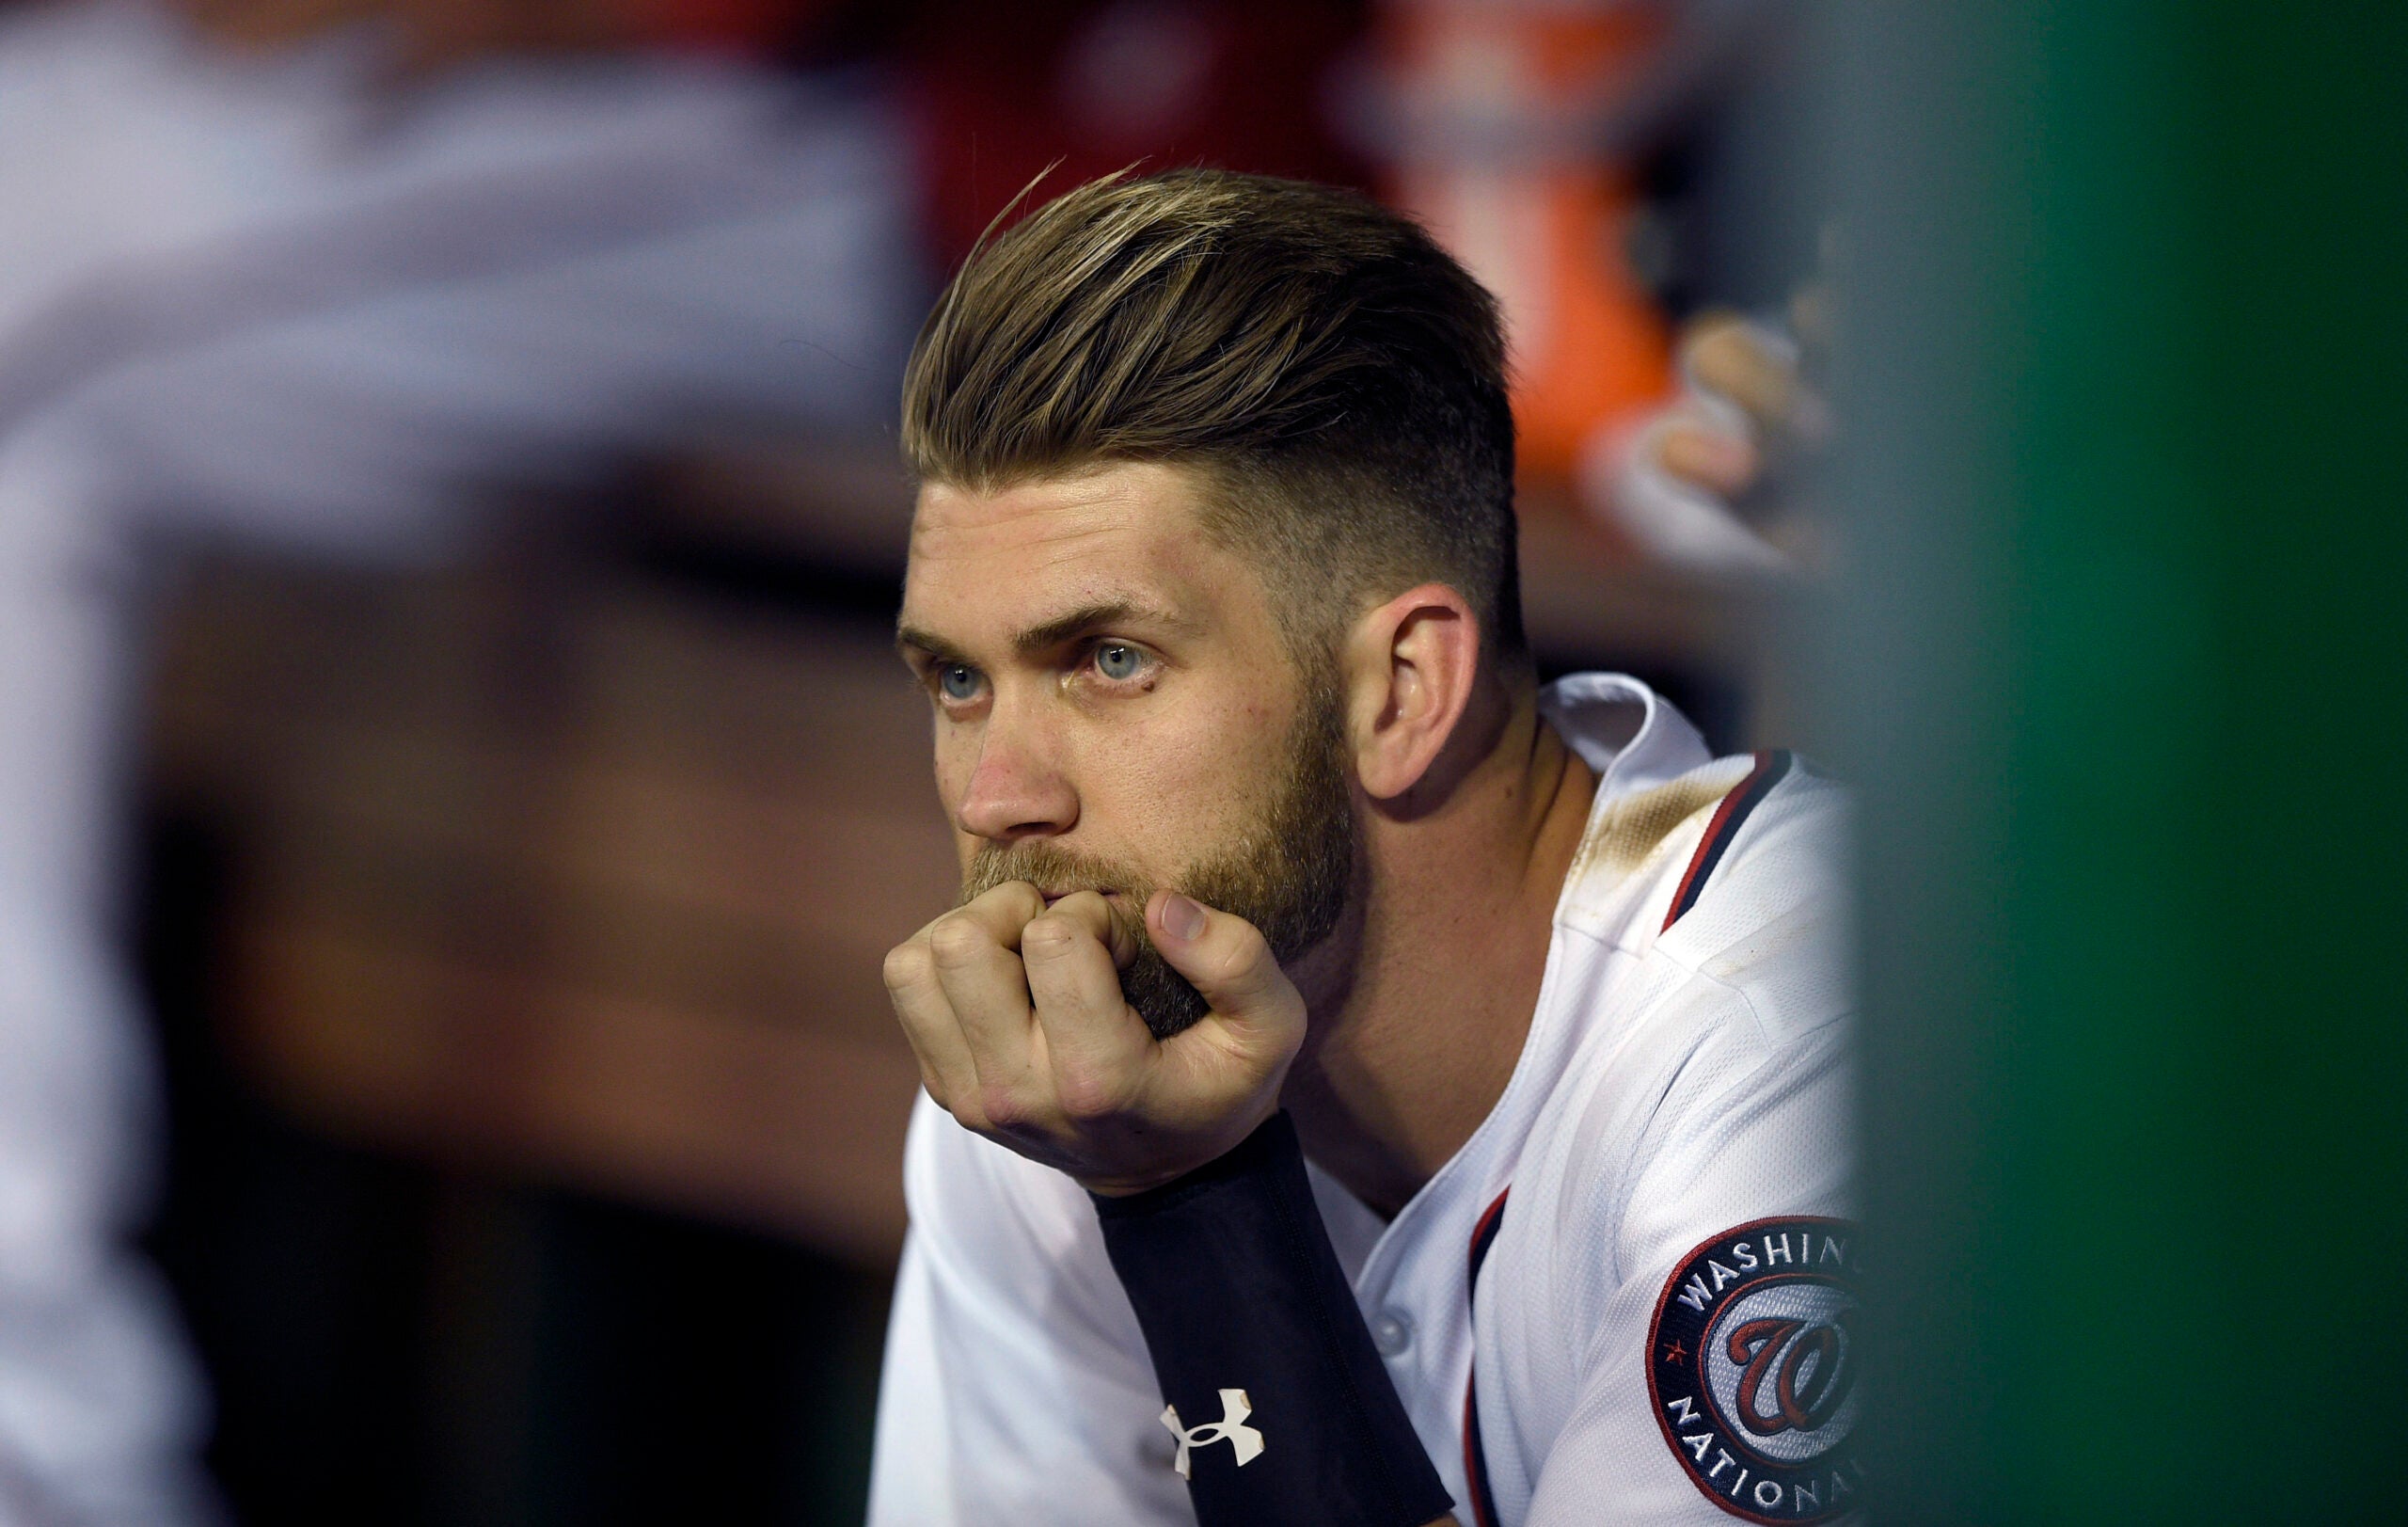 Bryce Harper's ejection featured some interesting hair